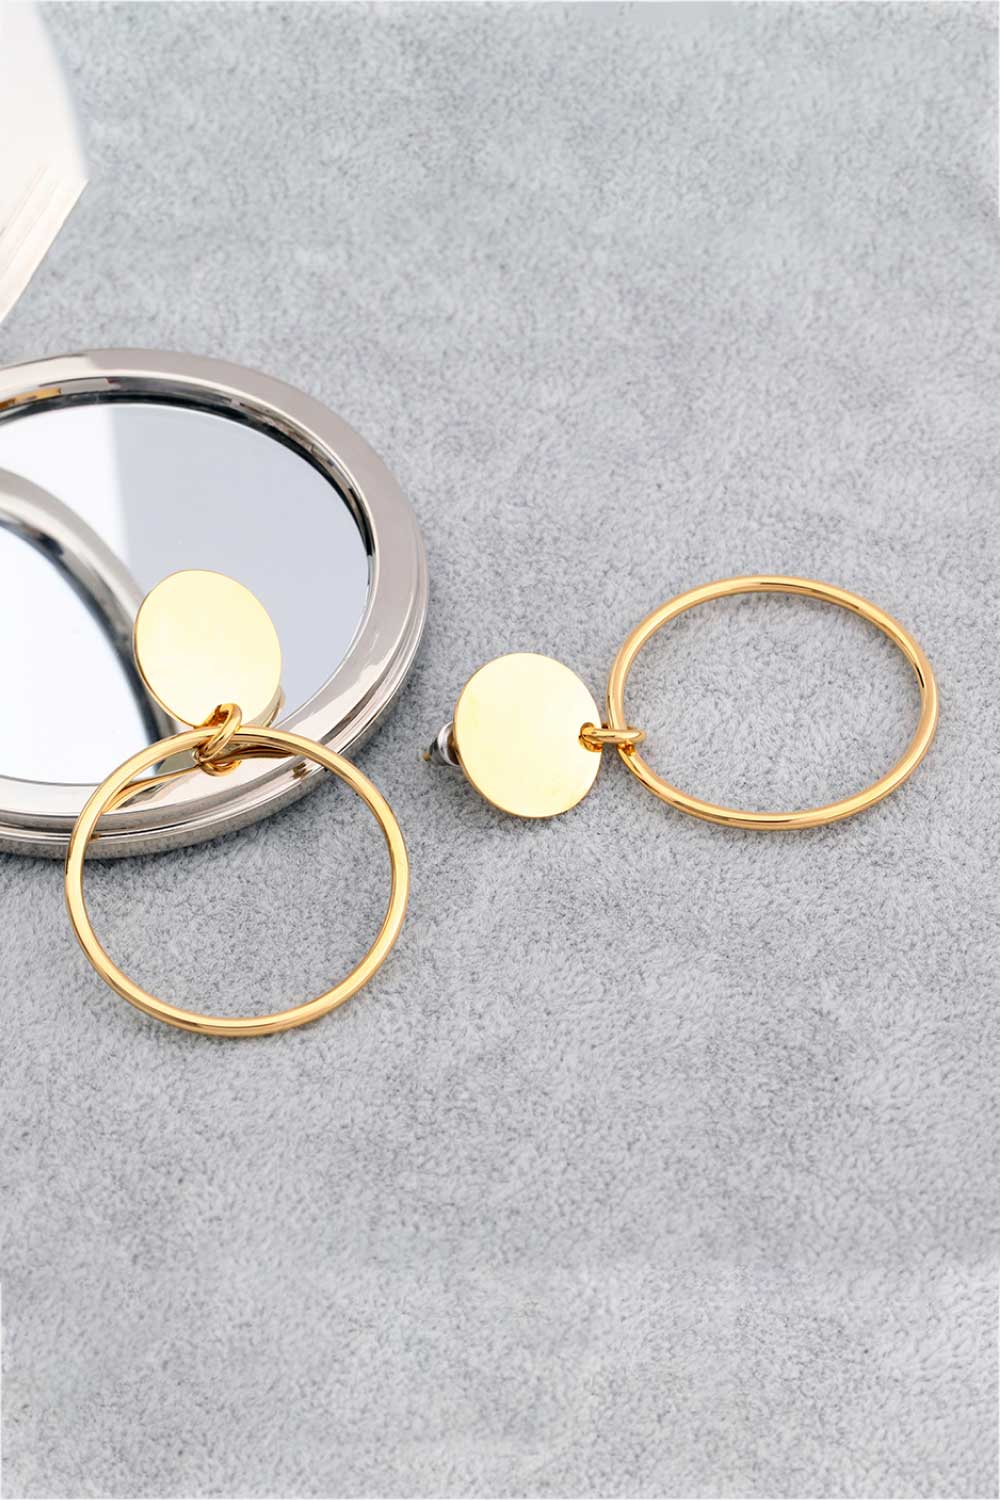 Gold-Plated Stainless Steel Drop Earrings (2 Colors)